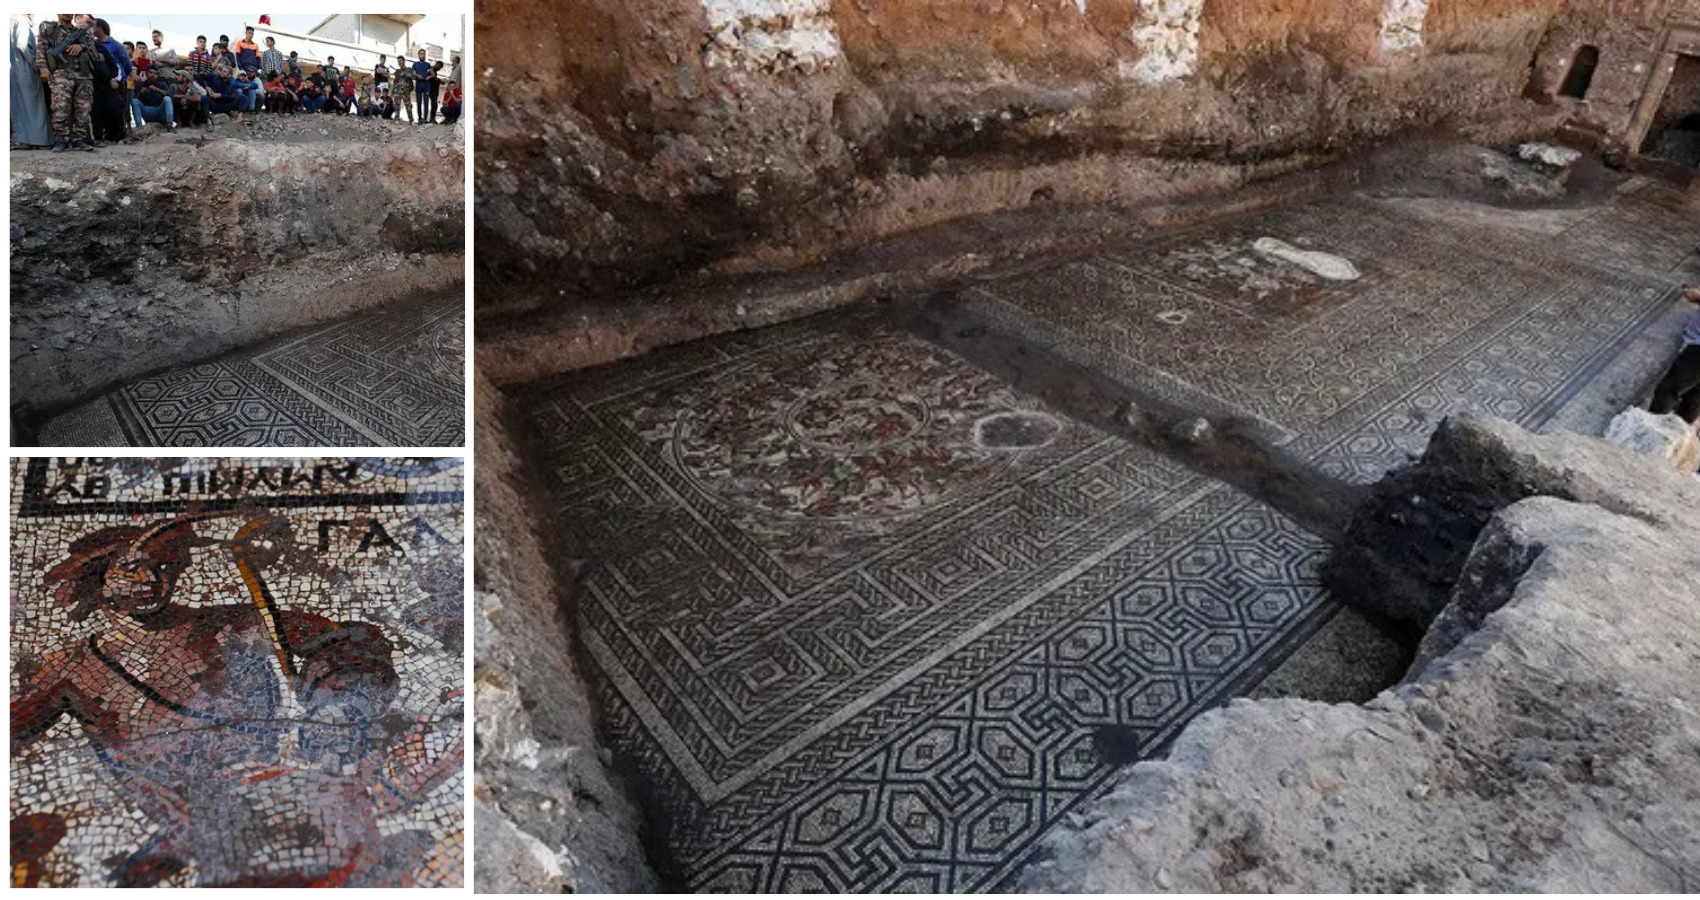 Syria digs up ‘rare’ Roman mosaic in former rebel stronghold